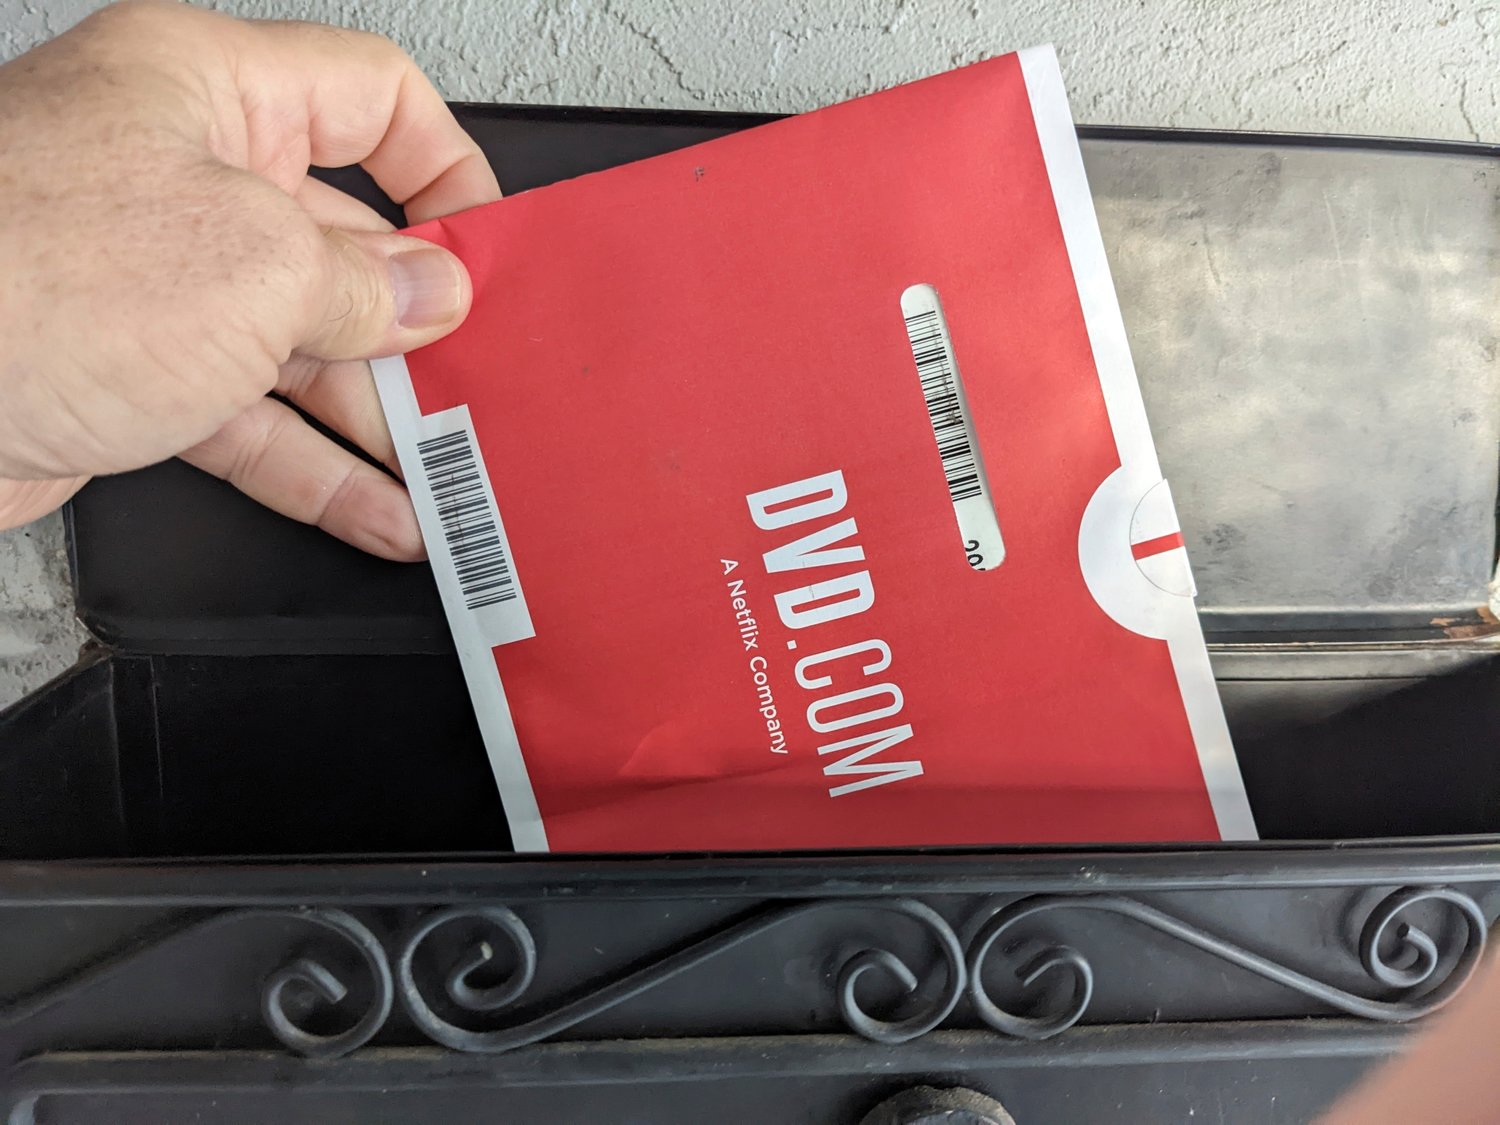 A Netflix DVD envelope is shown on Nov. 17, 2022 in San Francisco.  Subscribers to Netflix’s DVD-by-mail service still look forward to opening up their mailbox and finding one of the discs delivered in the familiar red-and-white envelopes.